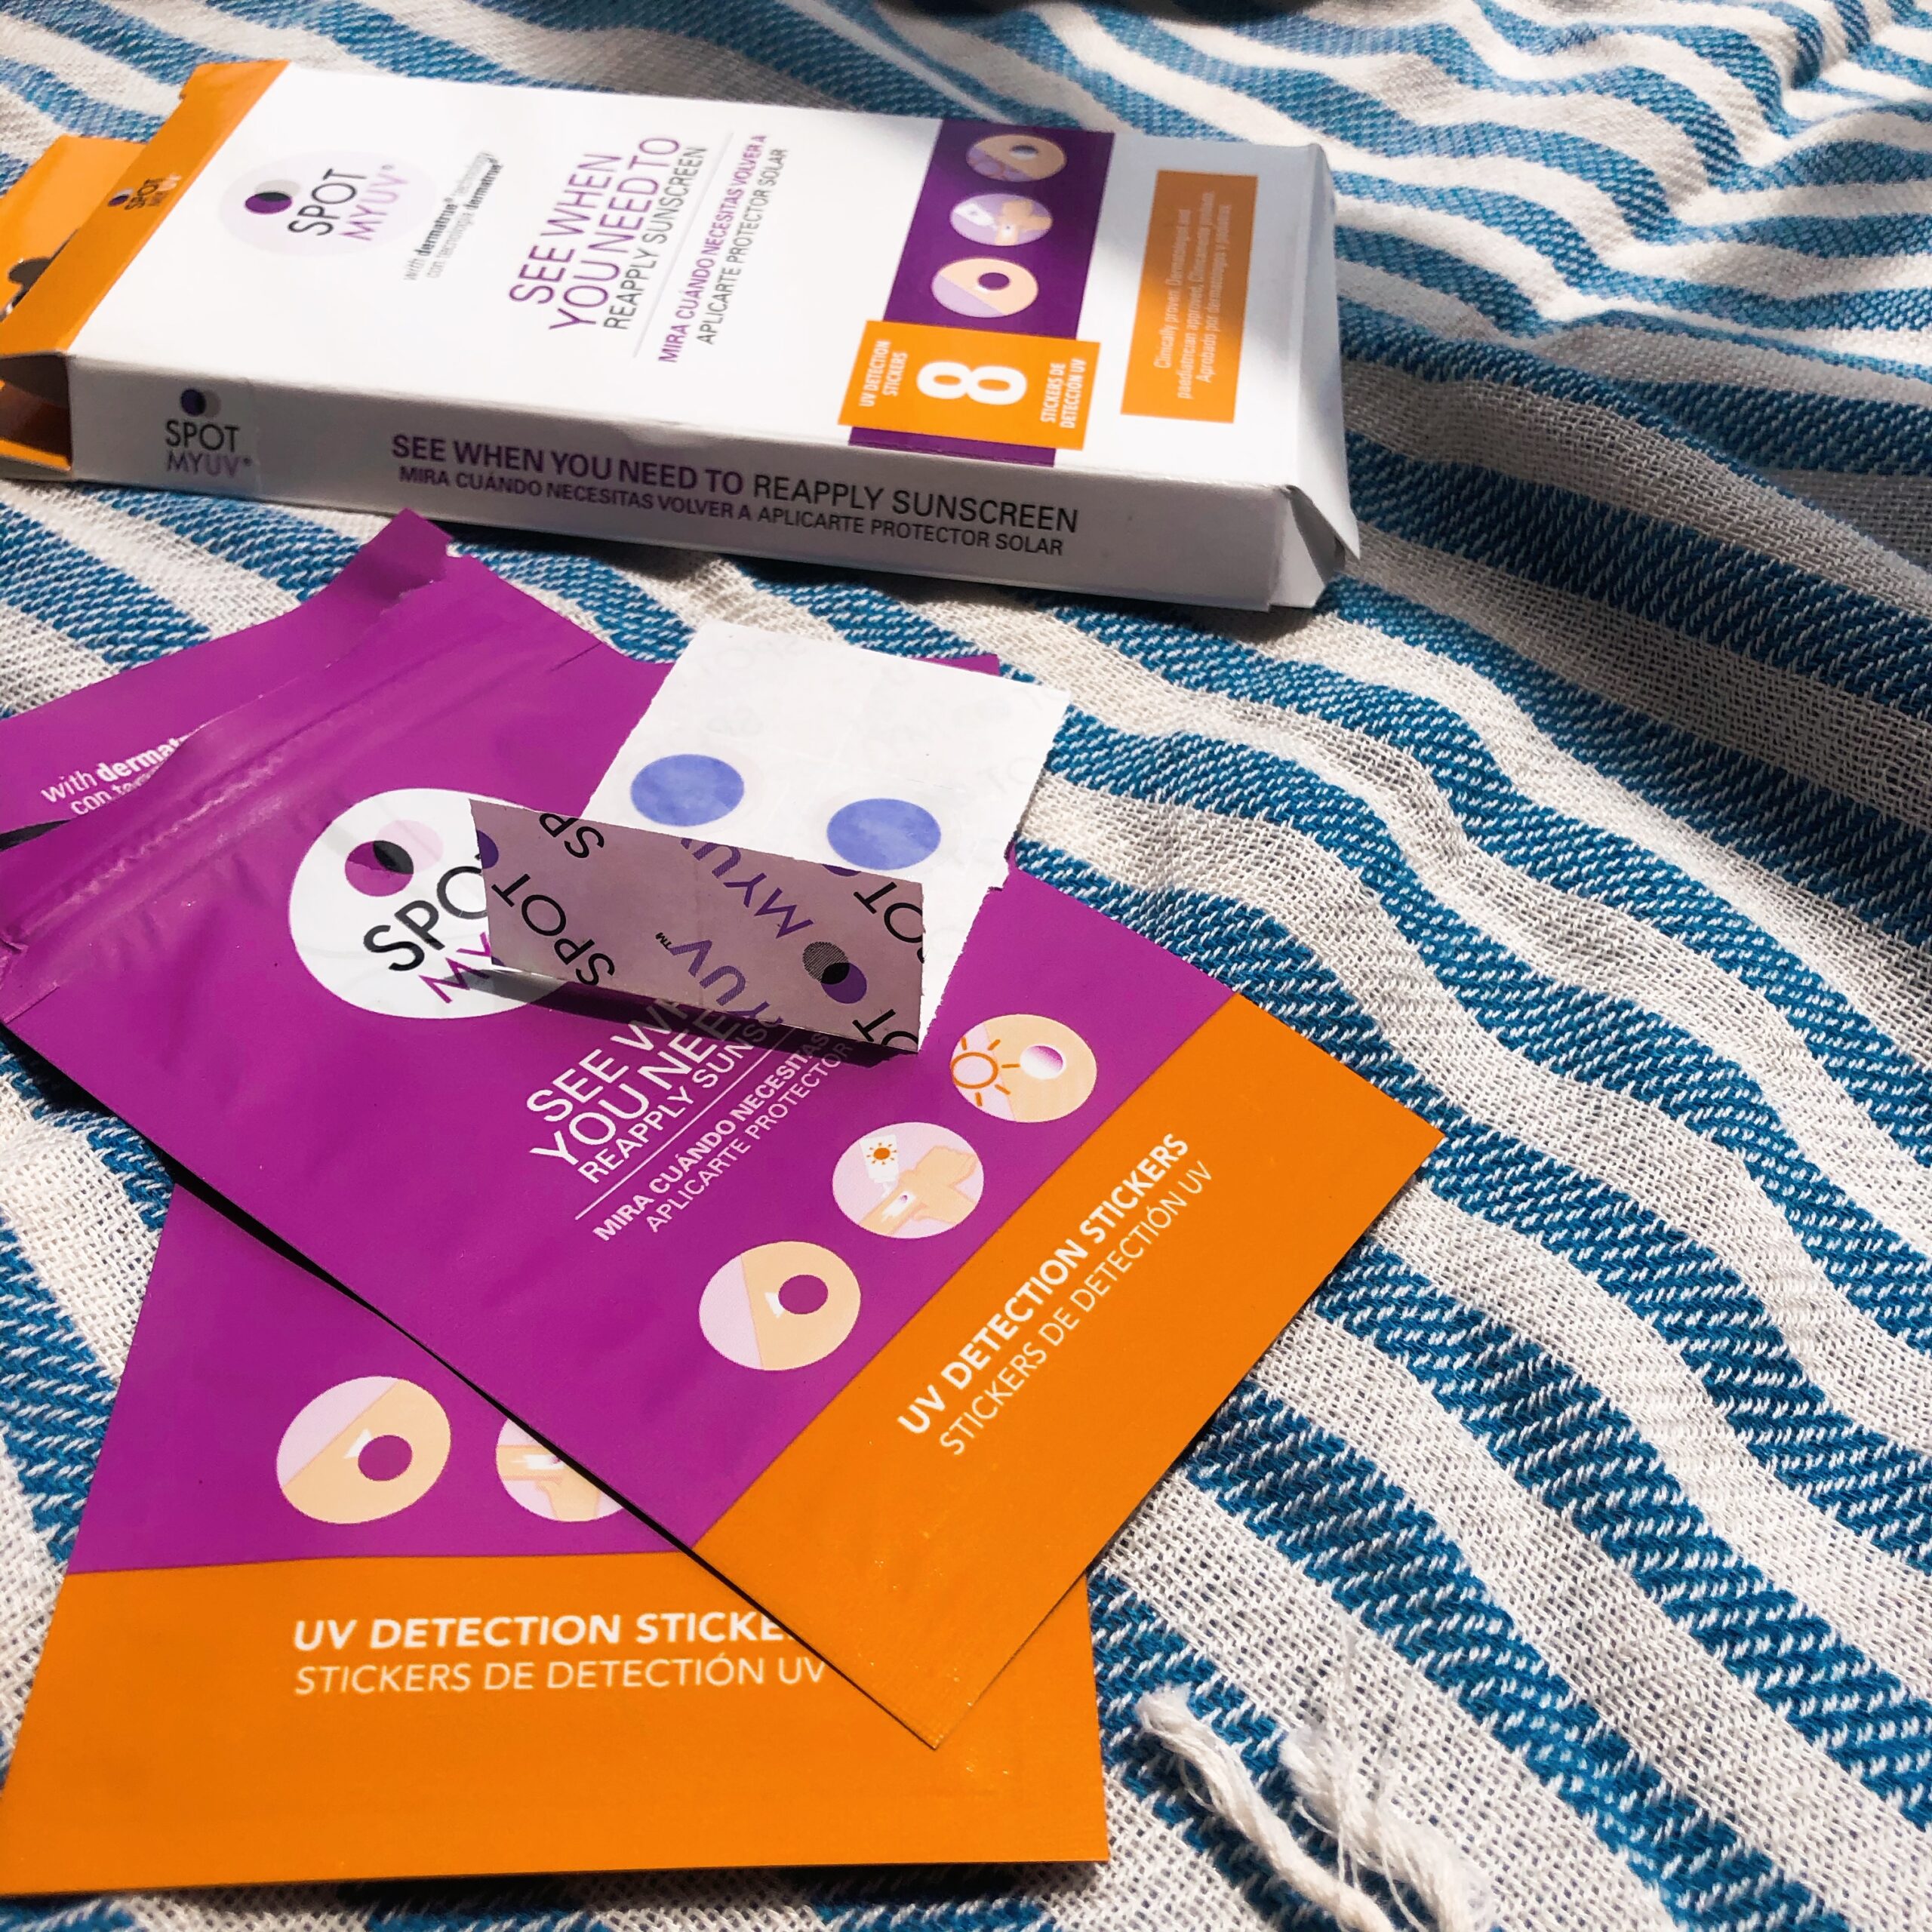 These Purple Stickers Proved Some Of My Sunscreens Really Don't Work